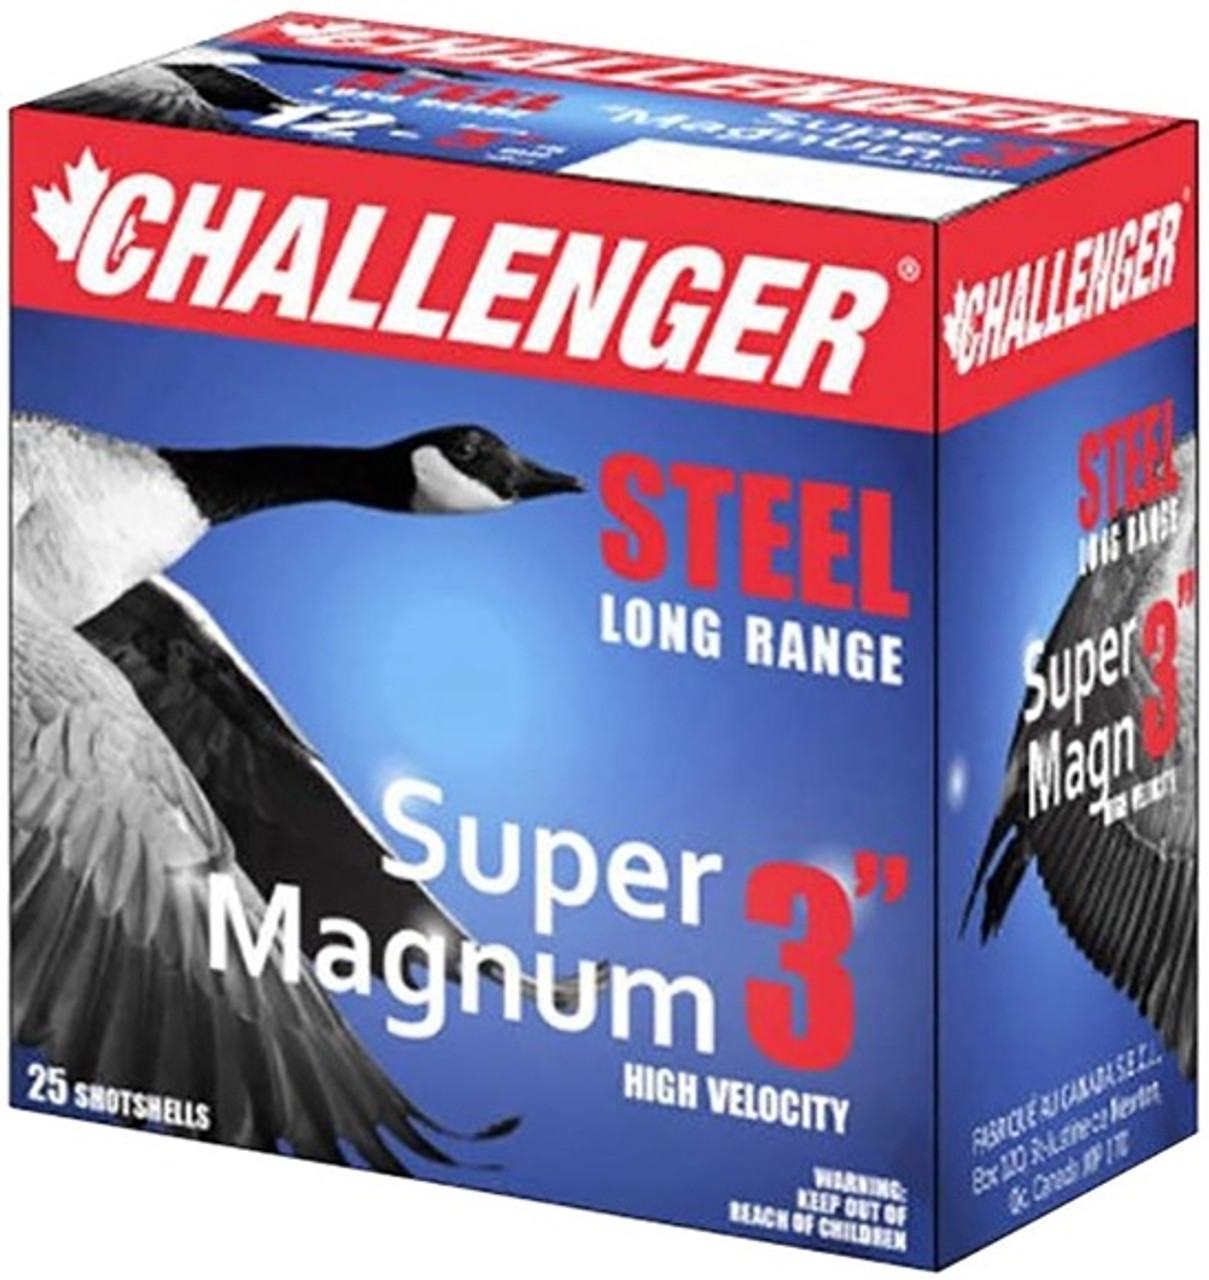 Challenger Ammunition is loaded in Canada with the finest components for the economy minded shooter. The fully reloadable plastic hull is primed with sure-fire Cheddite primers for consistency shot after shot. Slow burning powders offer unequalled performances; very light recoil, and less shot deformation. The one piece plastic wad, whether double or single piston, ensures the shooter with more clay busting and game getting performance. The special hermeplast base wad guarantees excellent humidity resistance and no distortion in shooting. This is loaded ammunition